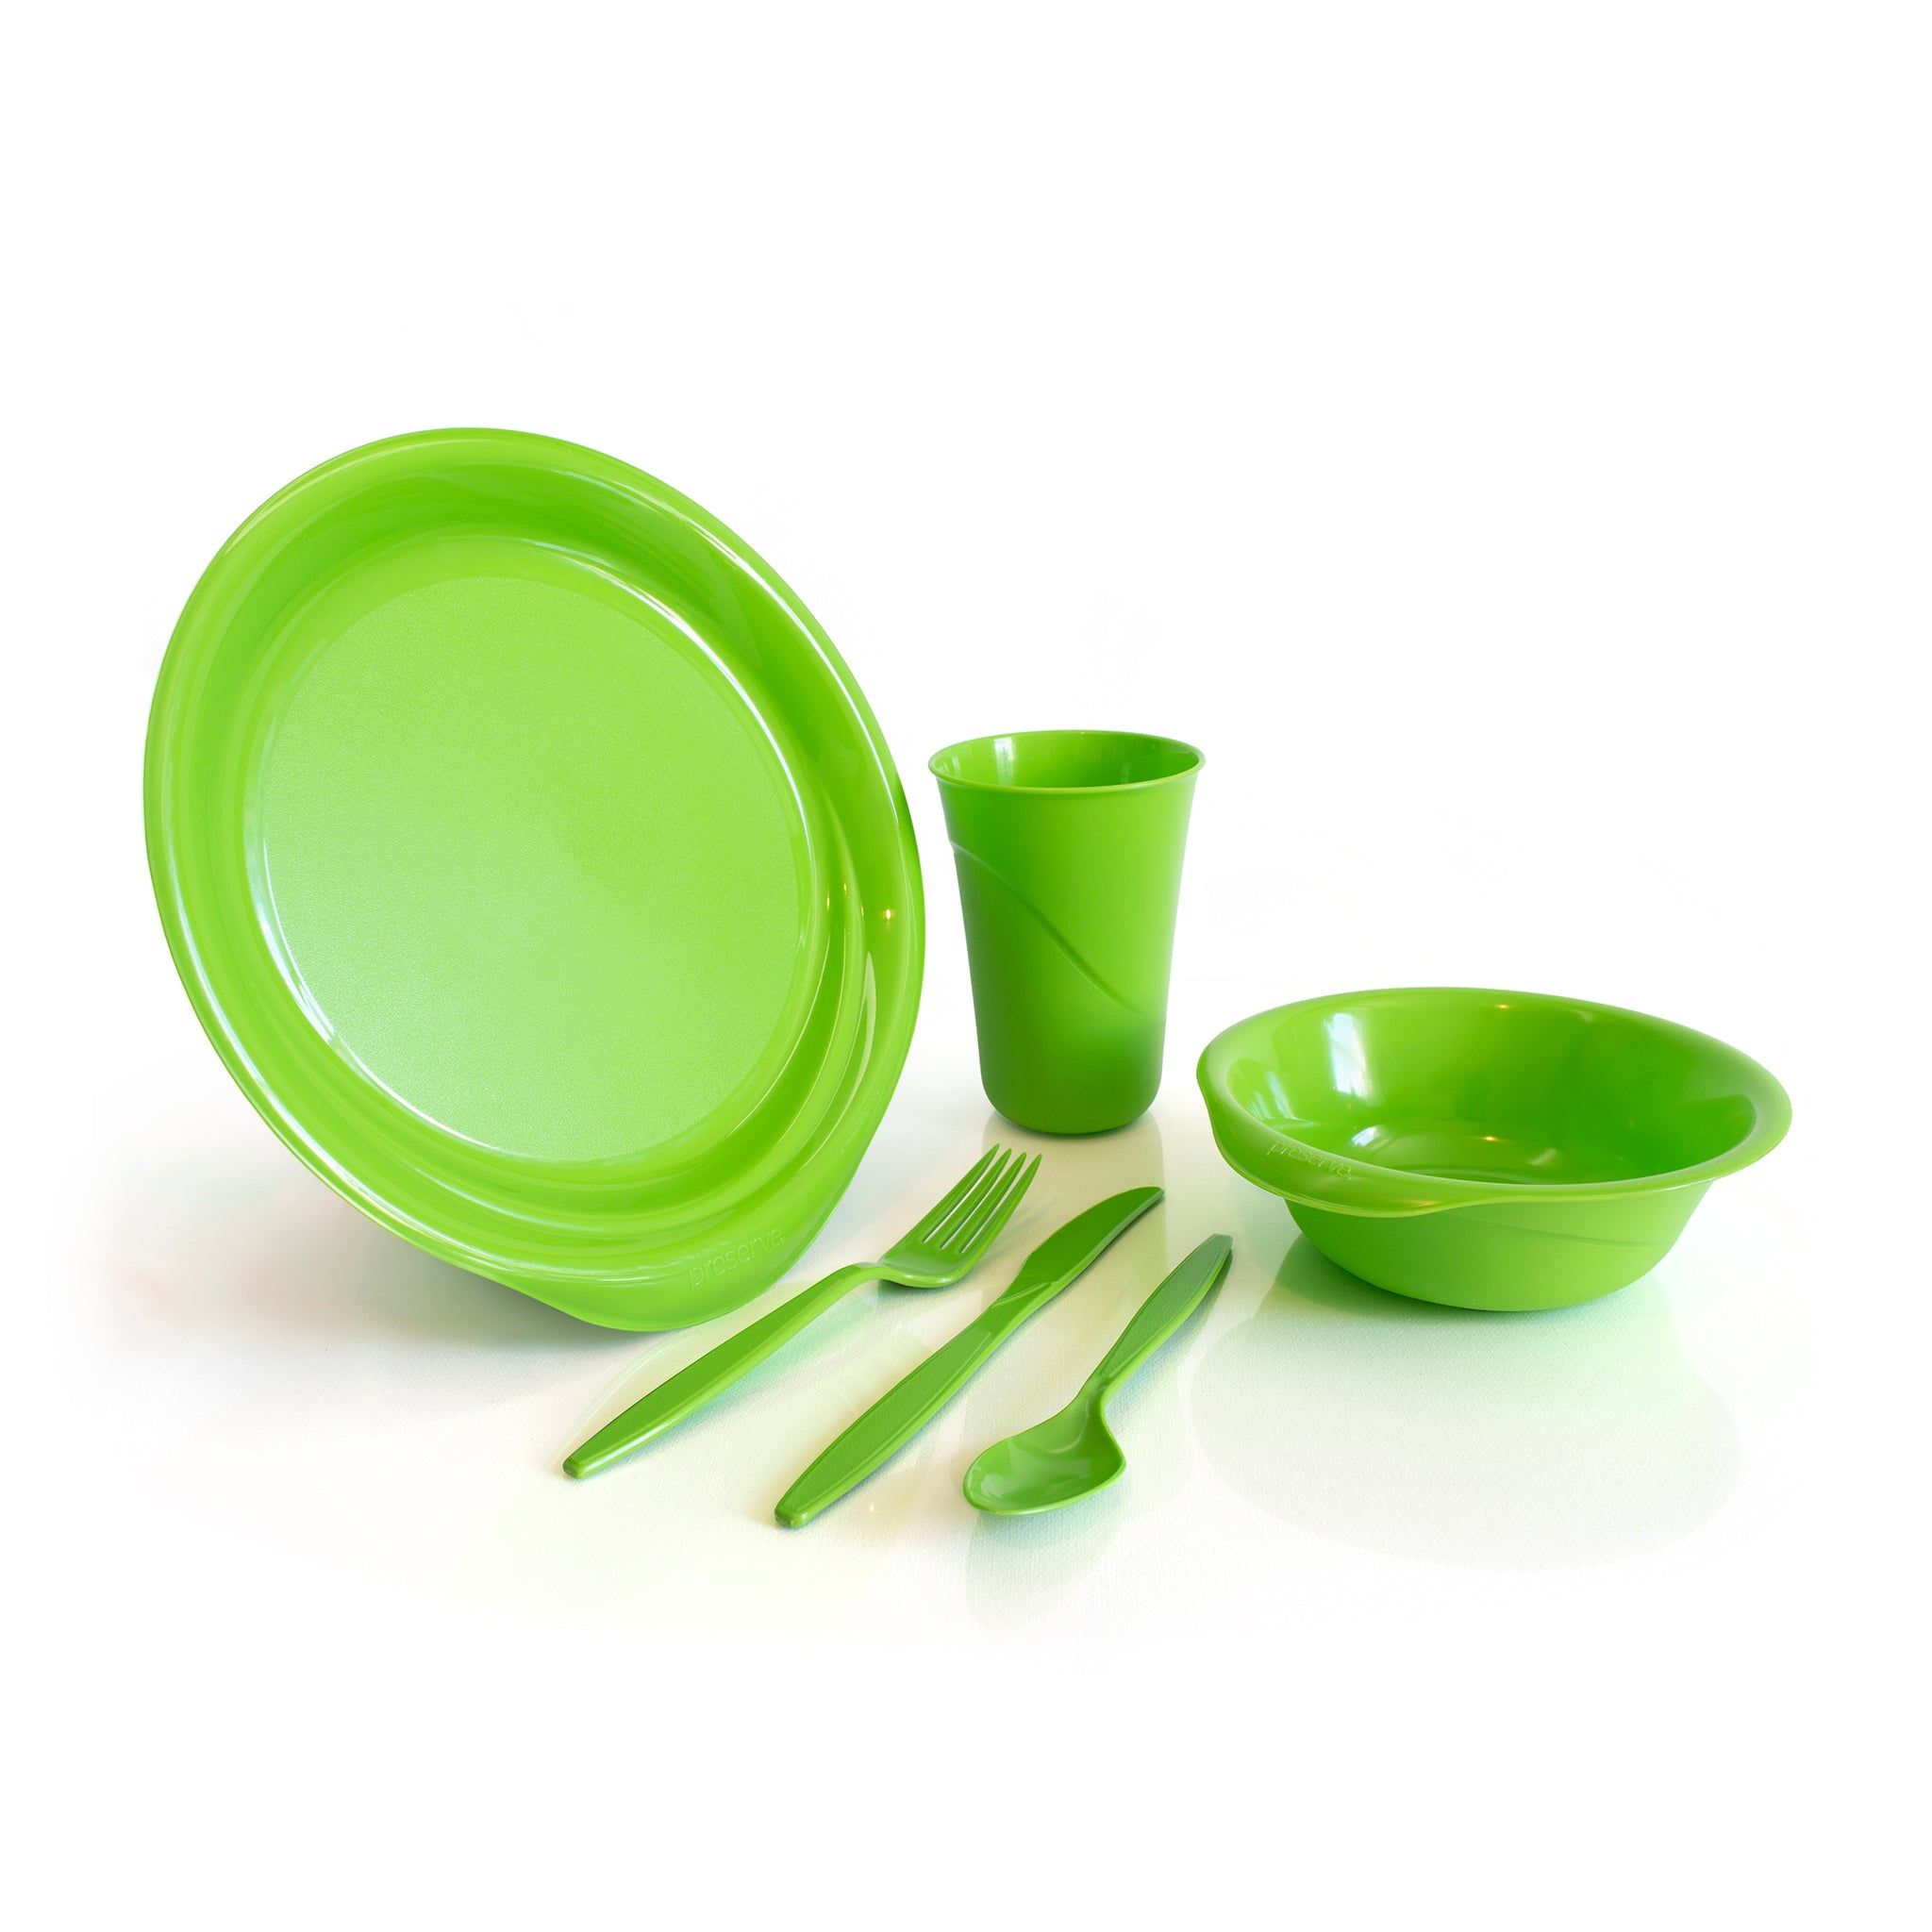 Recycled plastic dinner set in green